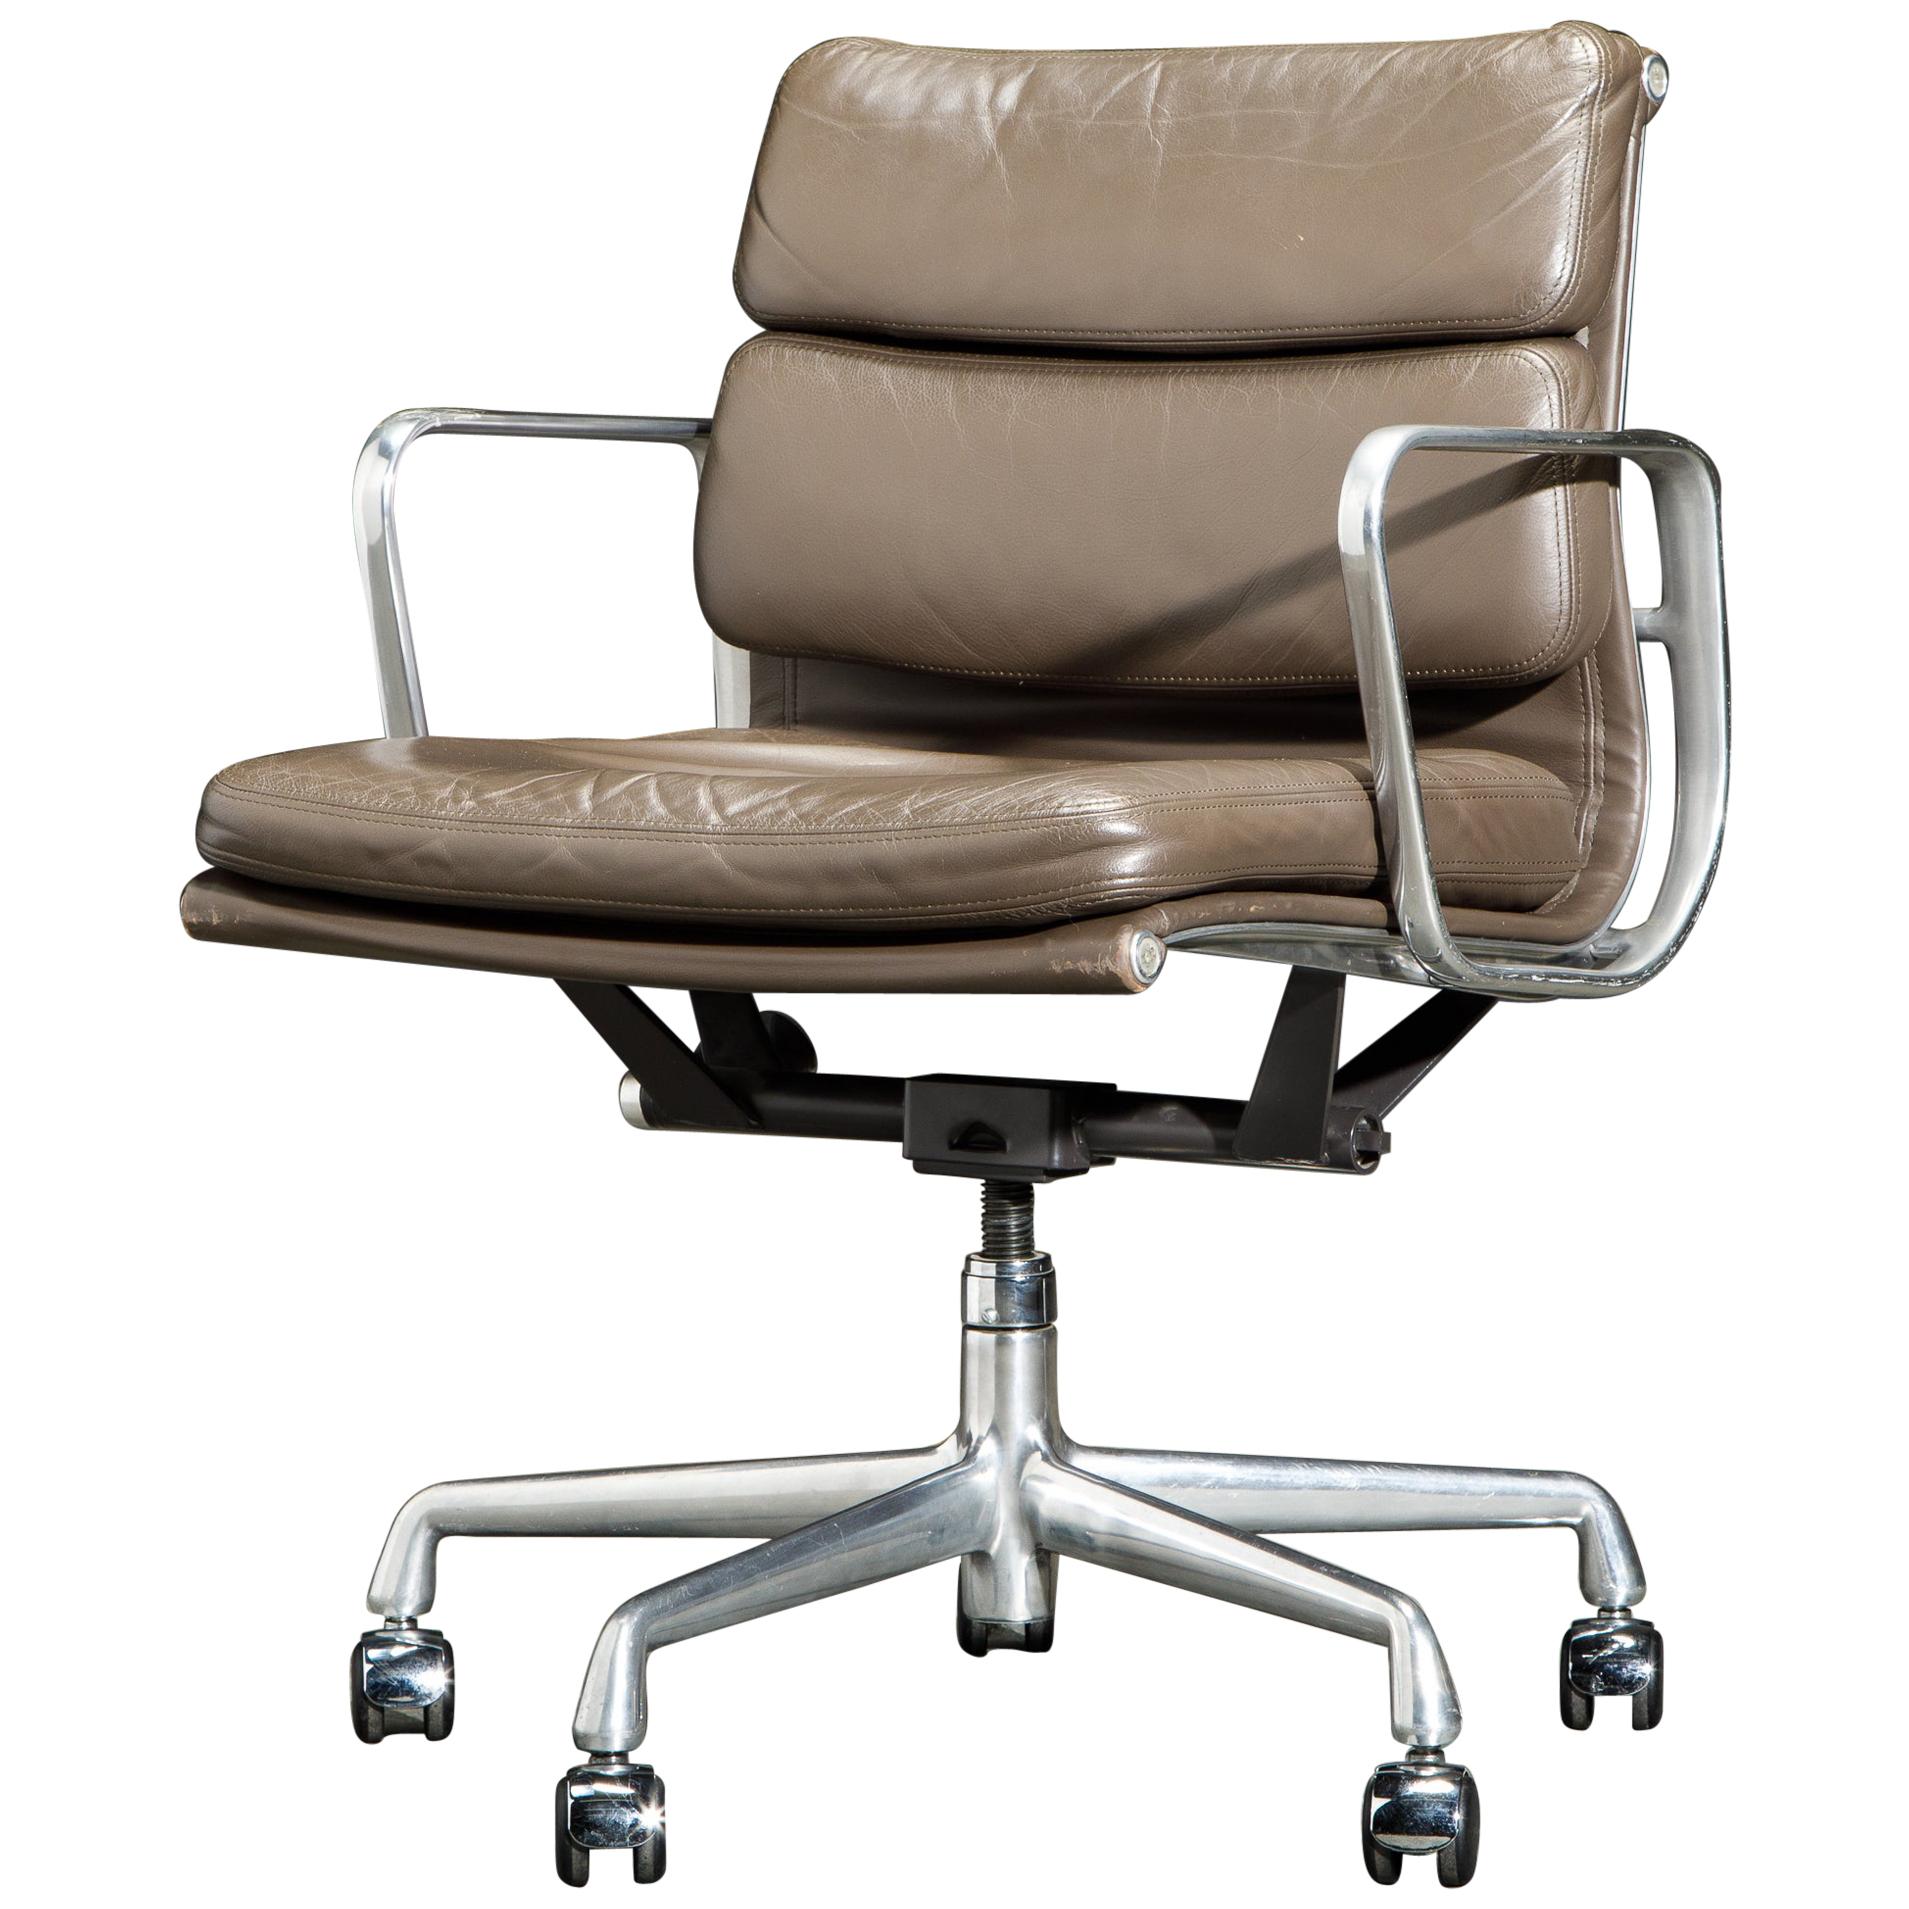 Soft Pad Management Desk Chair by Charles and Ray Eames for Herman Miller